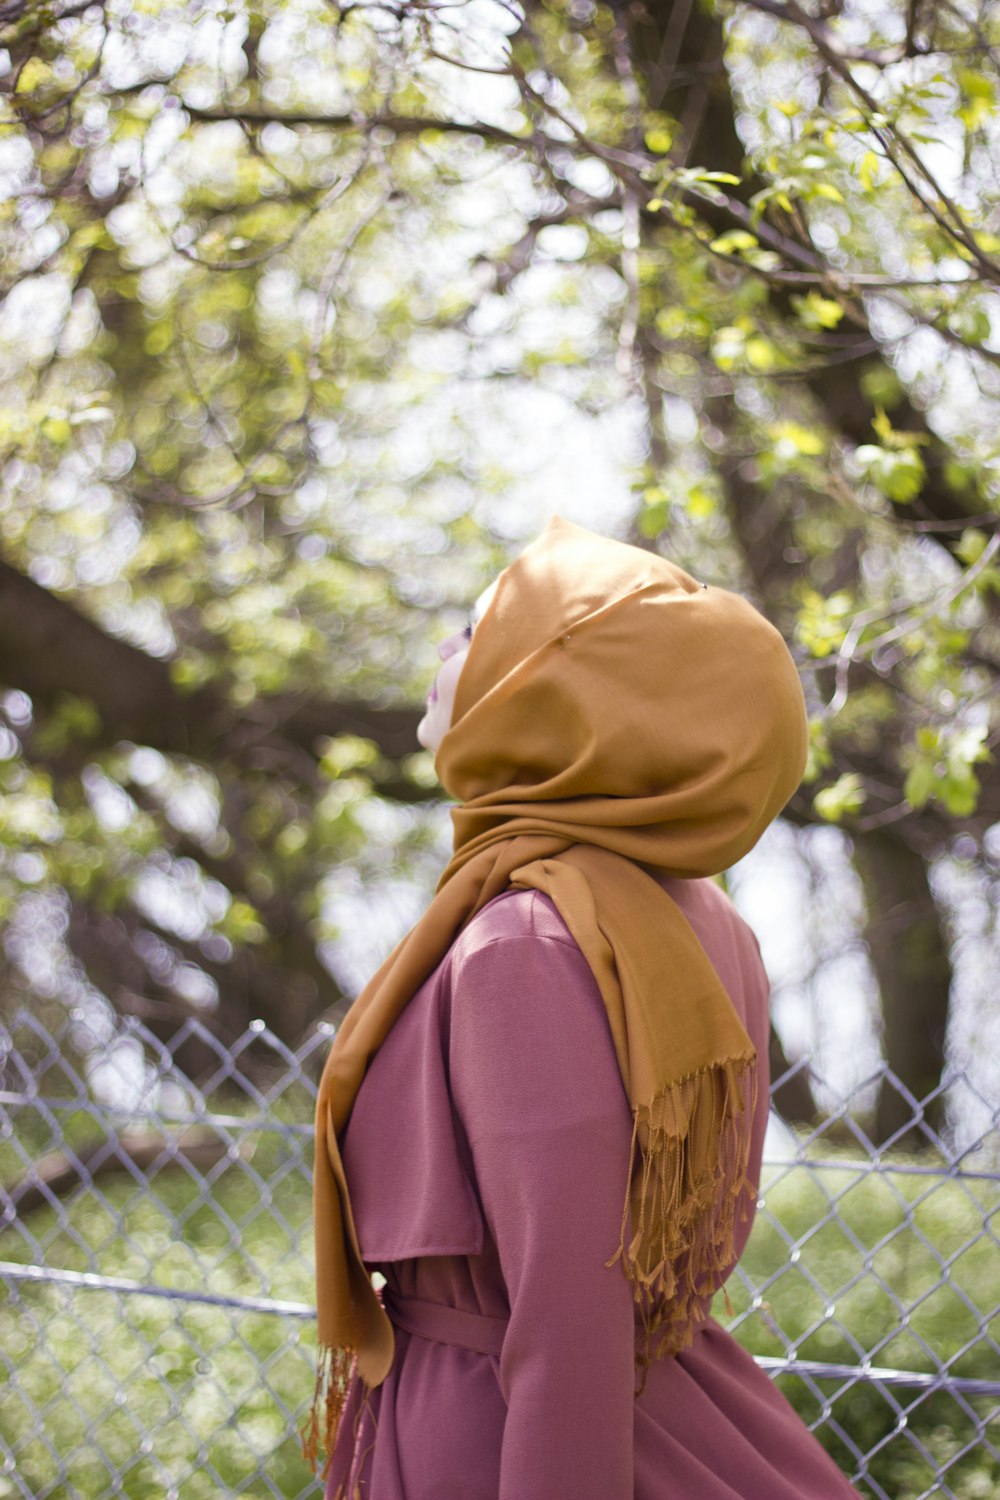 500 Hijab Pictures [hd] Download Free Images On Unsplash